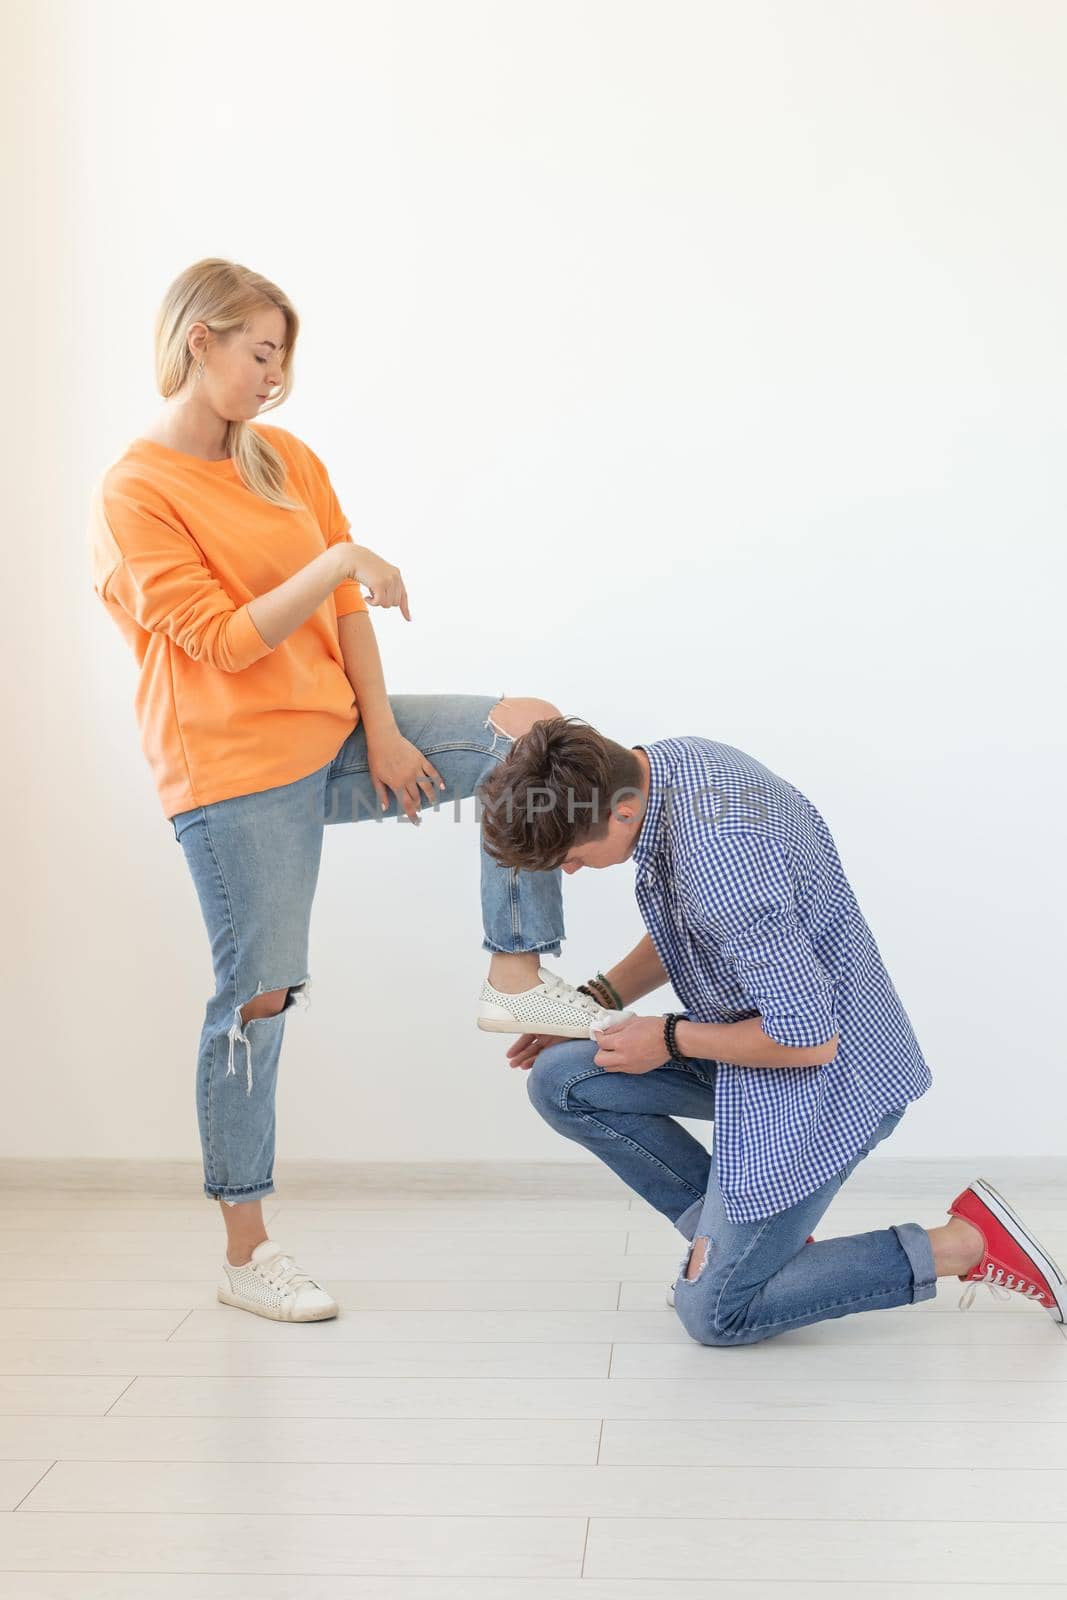 Young man tying shoelaces of his beloved woman posing on the white background. Concept of courtship and reverent relationships. Advertising space